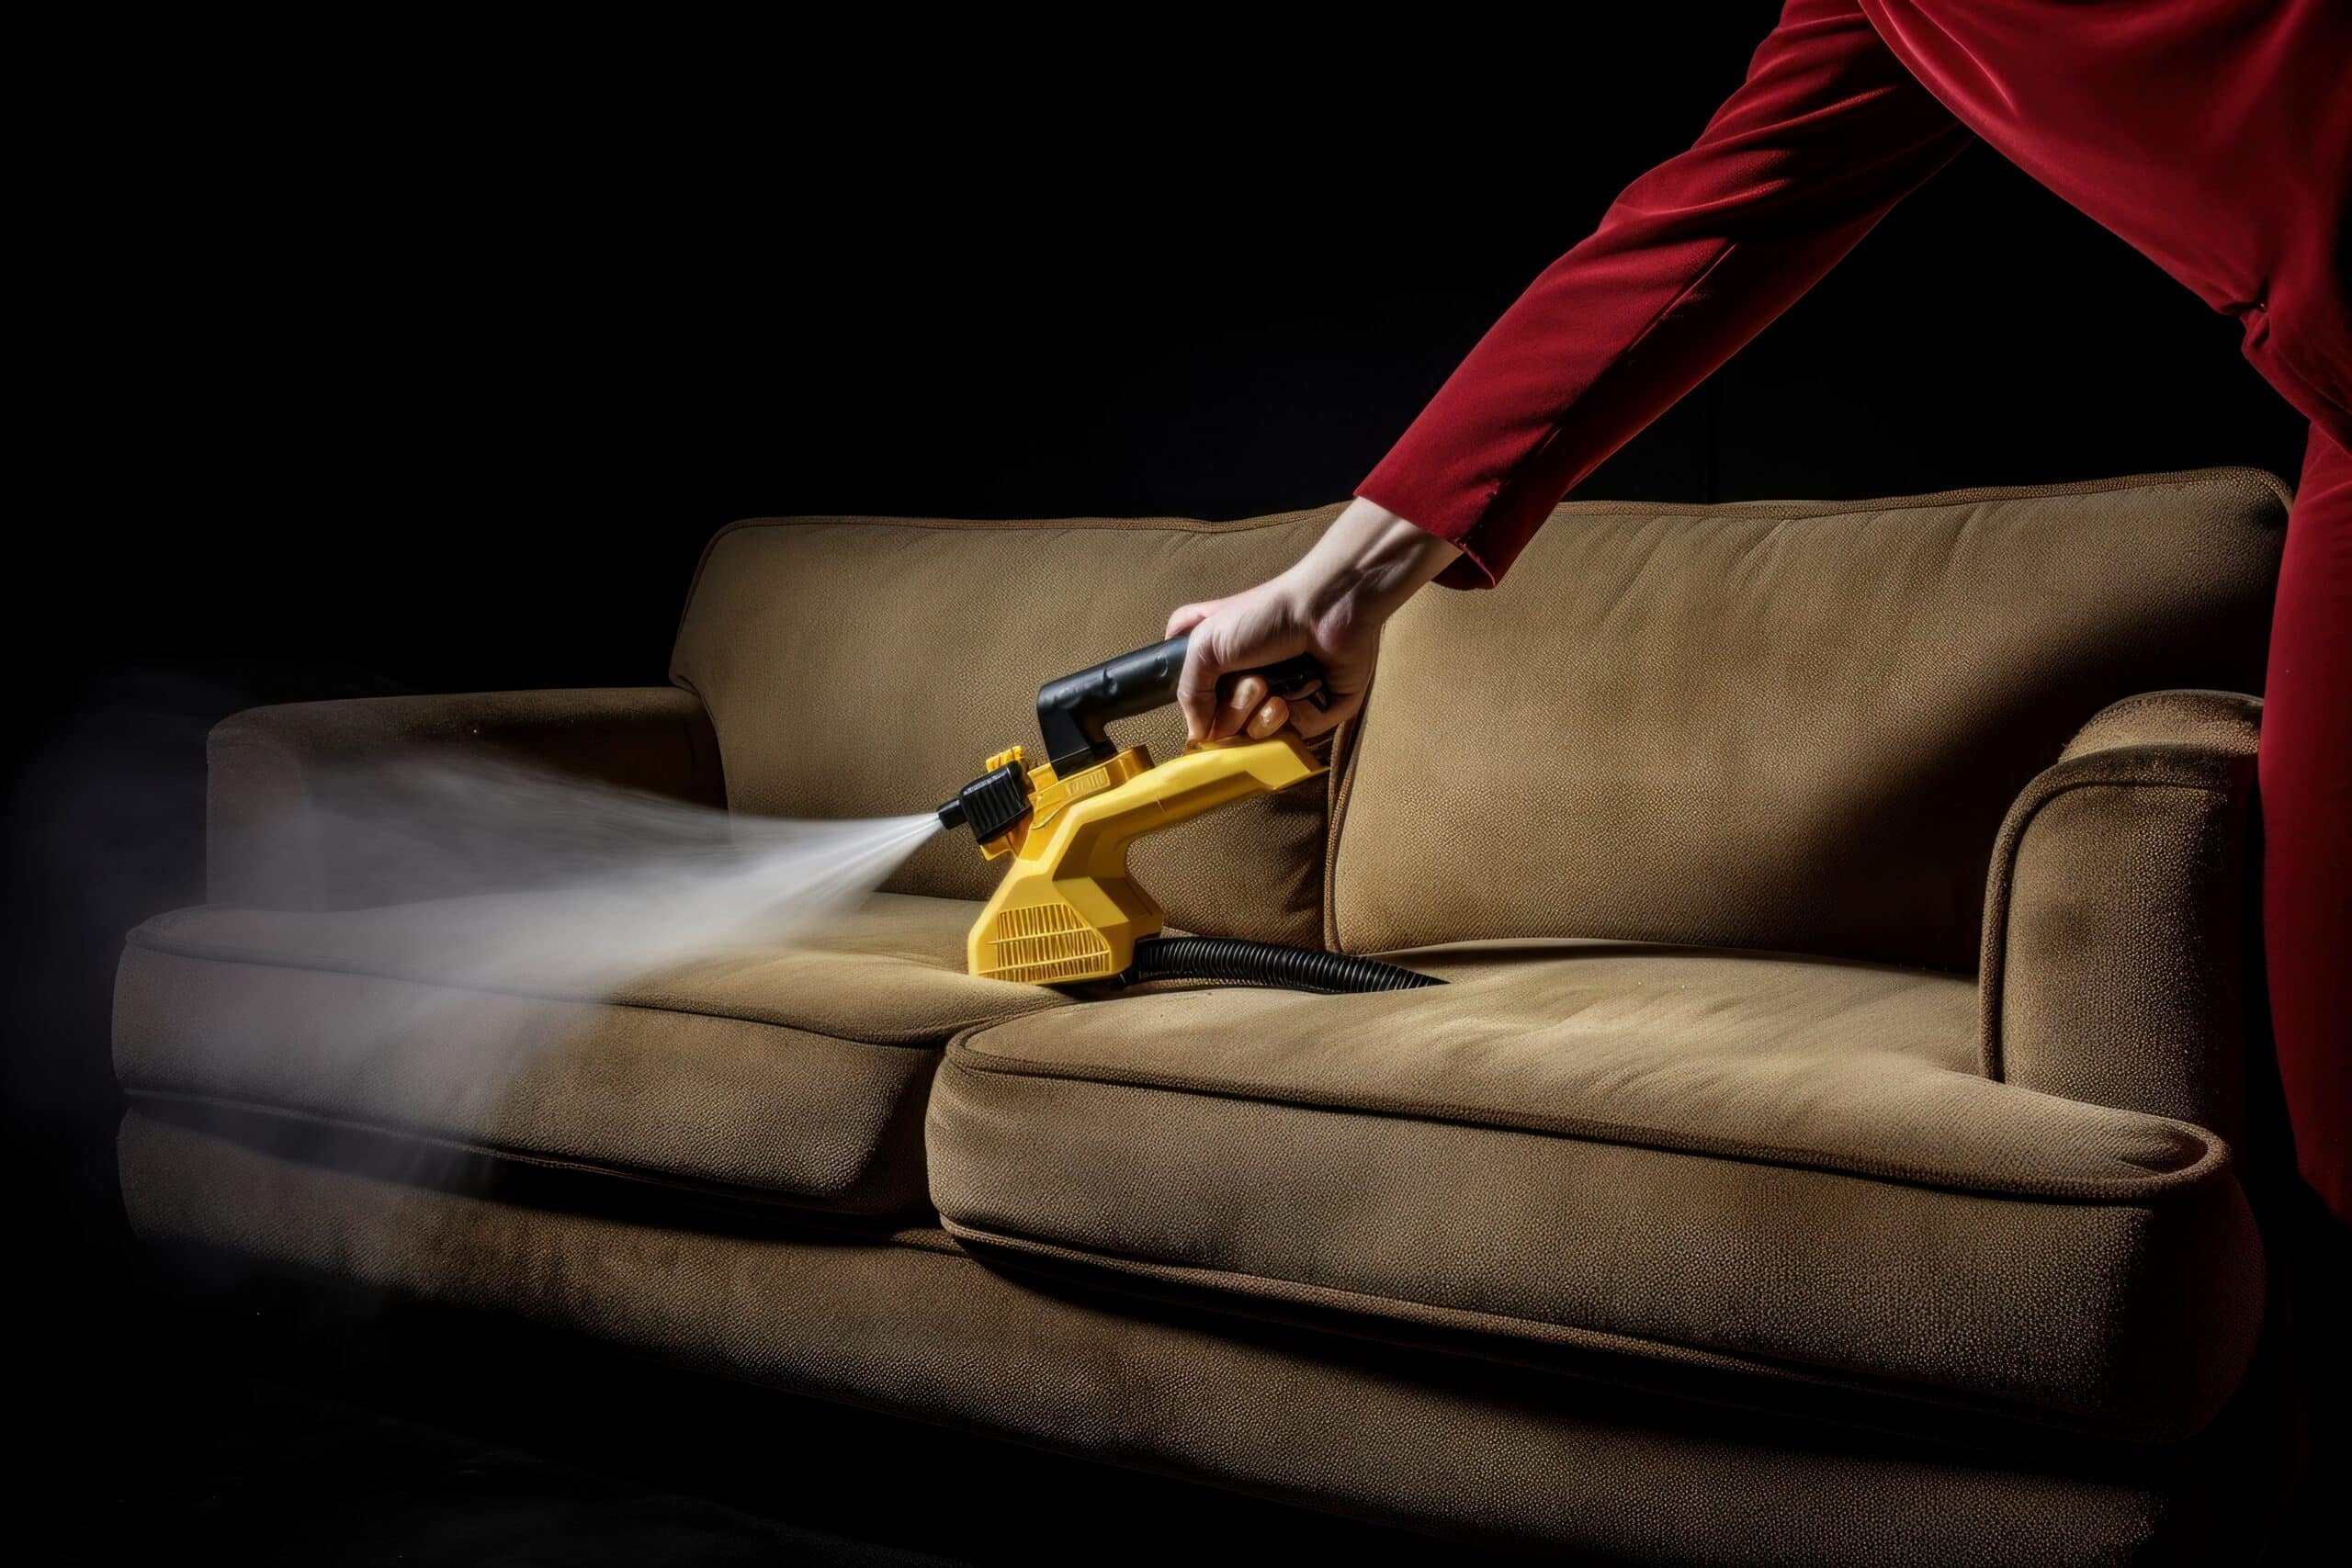 www.appr.com : What are the benefits of using a steam cleaner for upholstery and carpet?